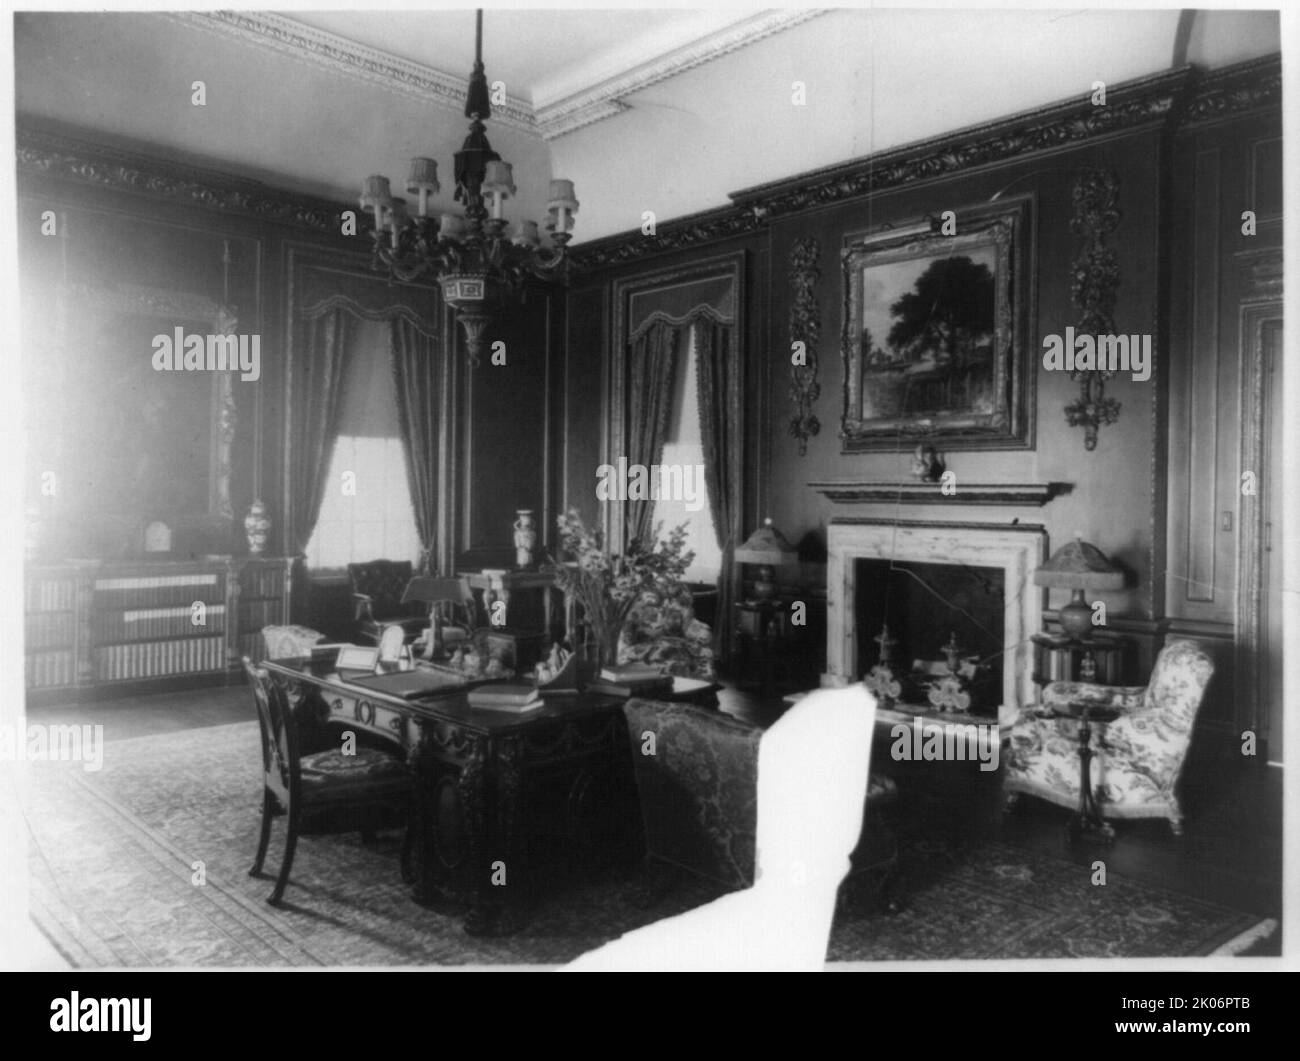 Interior view of Mrs. Hamilton Rice home in Newport, Rhode Island, with desk and fireplace, between 1917 and 1927. The Miramar neoclassical mansion was designed by Horace Trumbauer for heiress and philanthropist Eleanor Elkins Widener and her husband George Widener. After George died aboard the RMS Titanic in 1912 Eleanor married again, and Miramar was used as a summer residence by her and her second husband, geographer and explorer Alexander H. Rice Jr. Stock Photo